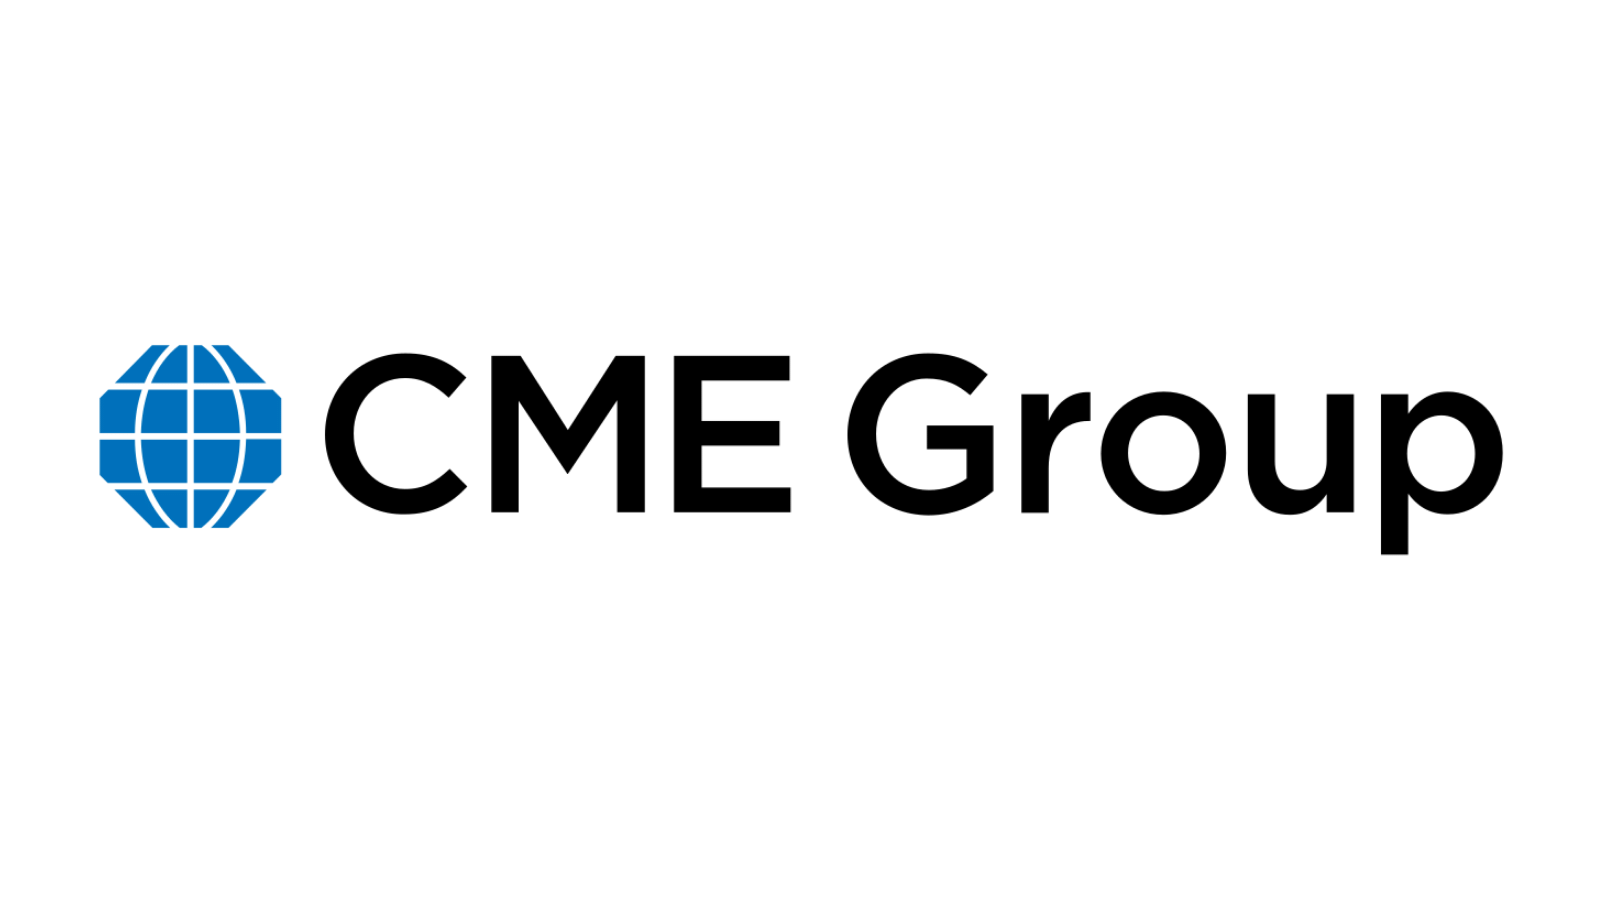 CME Group Achieves Quarterly International Average Daily Volume of 7.3 Million Contracts in Q1 2022